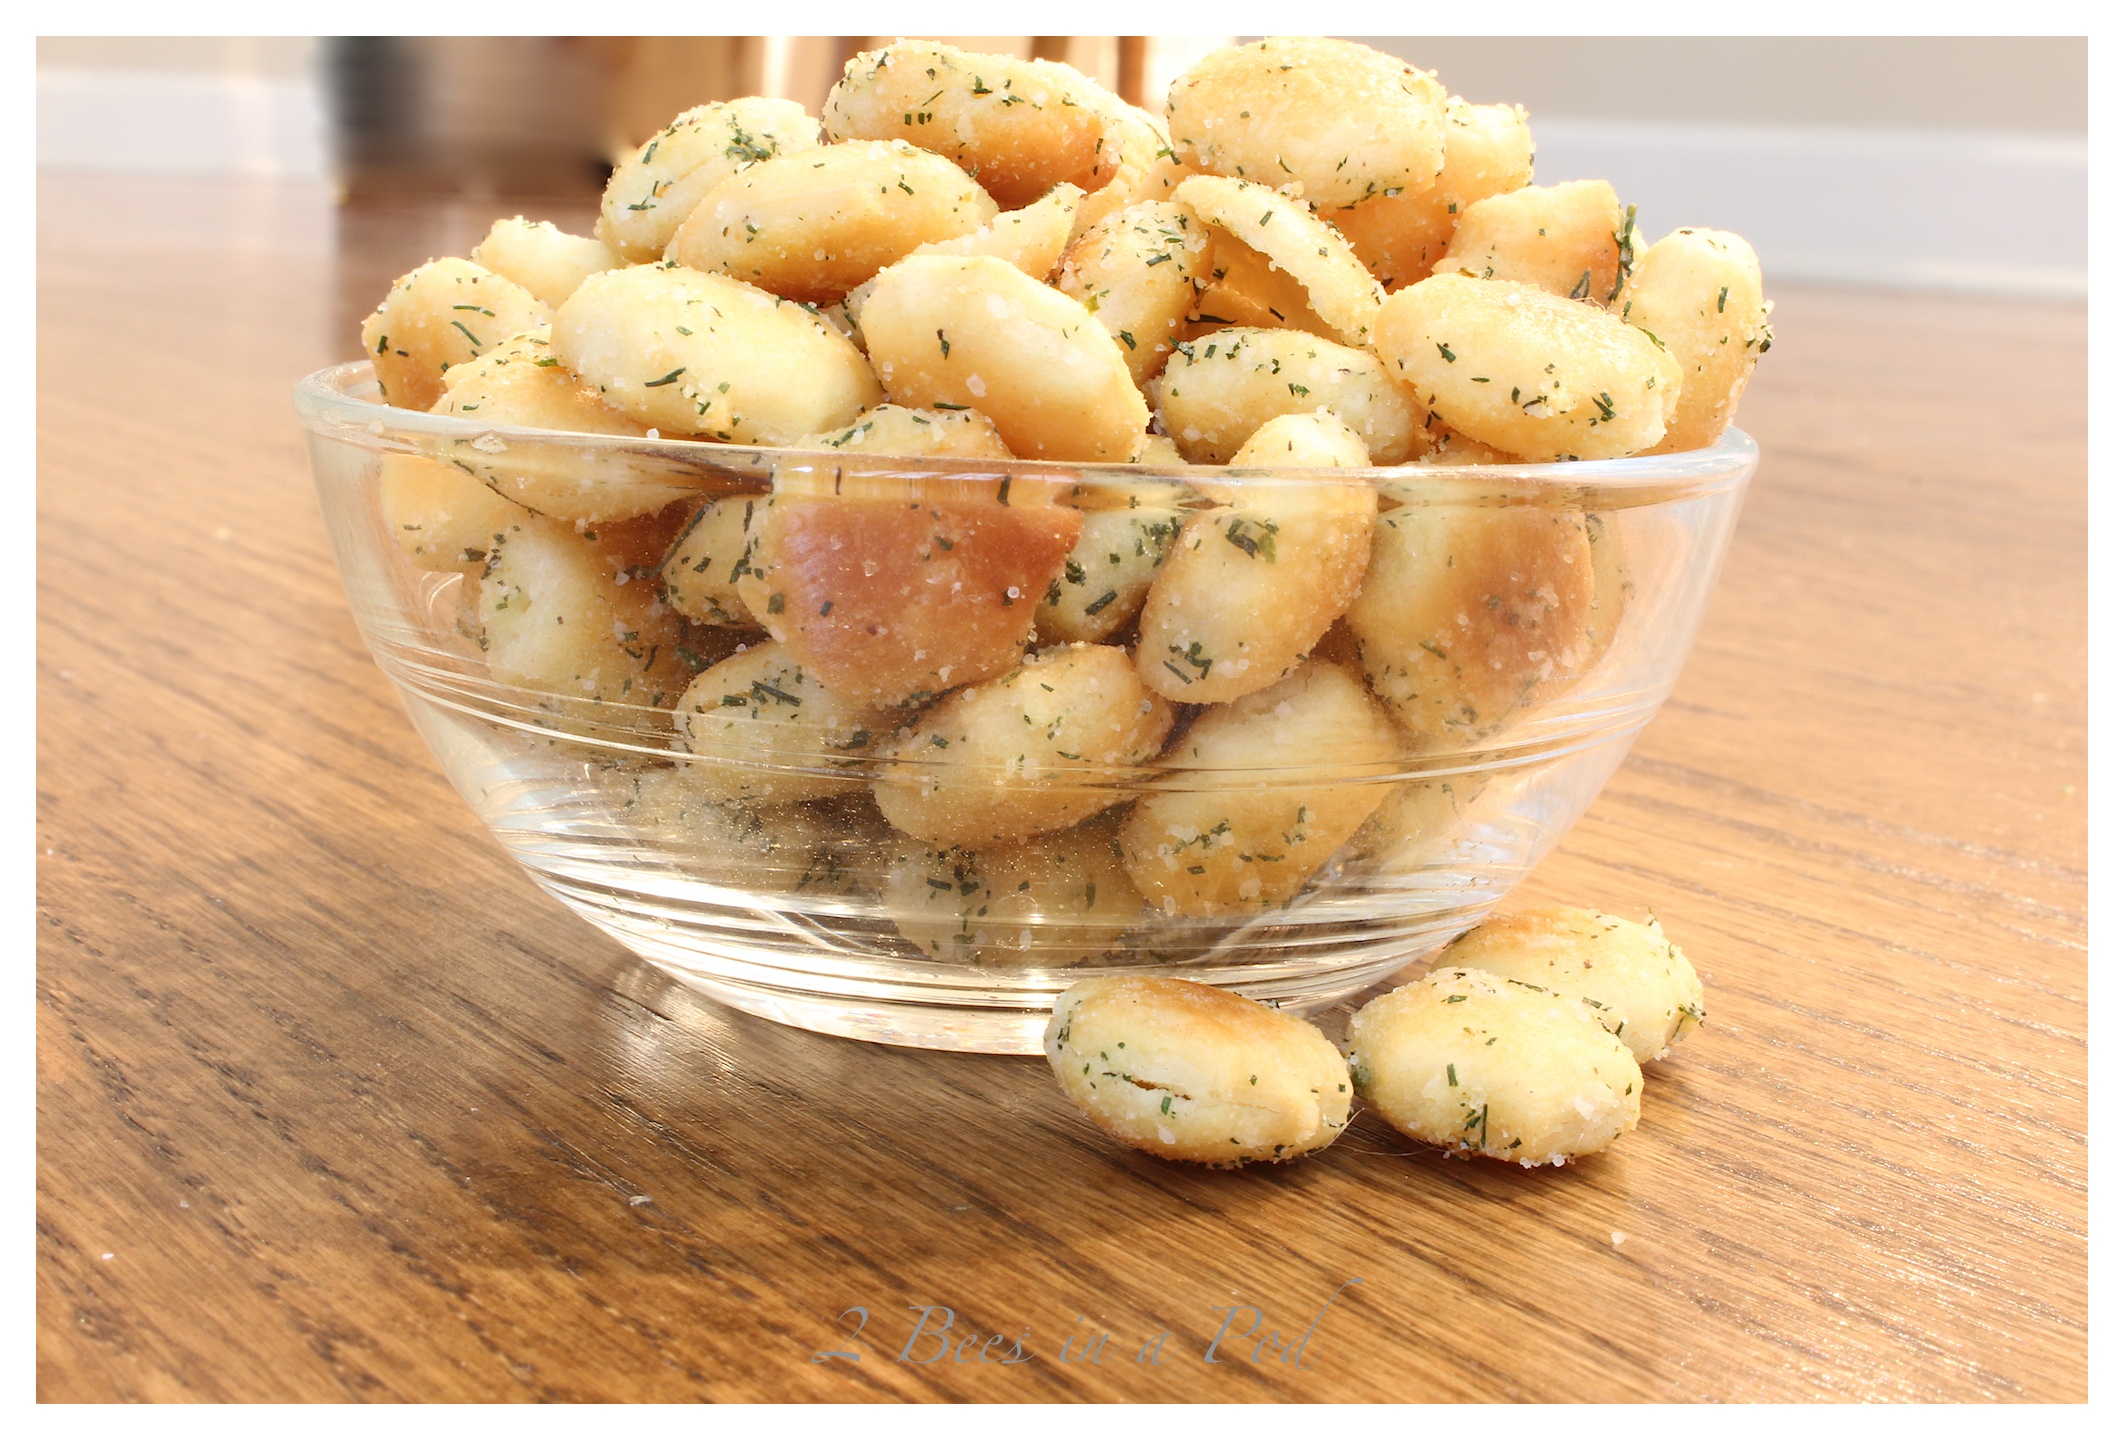 Ranch Oyster Crackers - yummy, flavorful snack or cocktail party nibble.